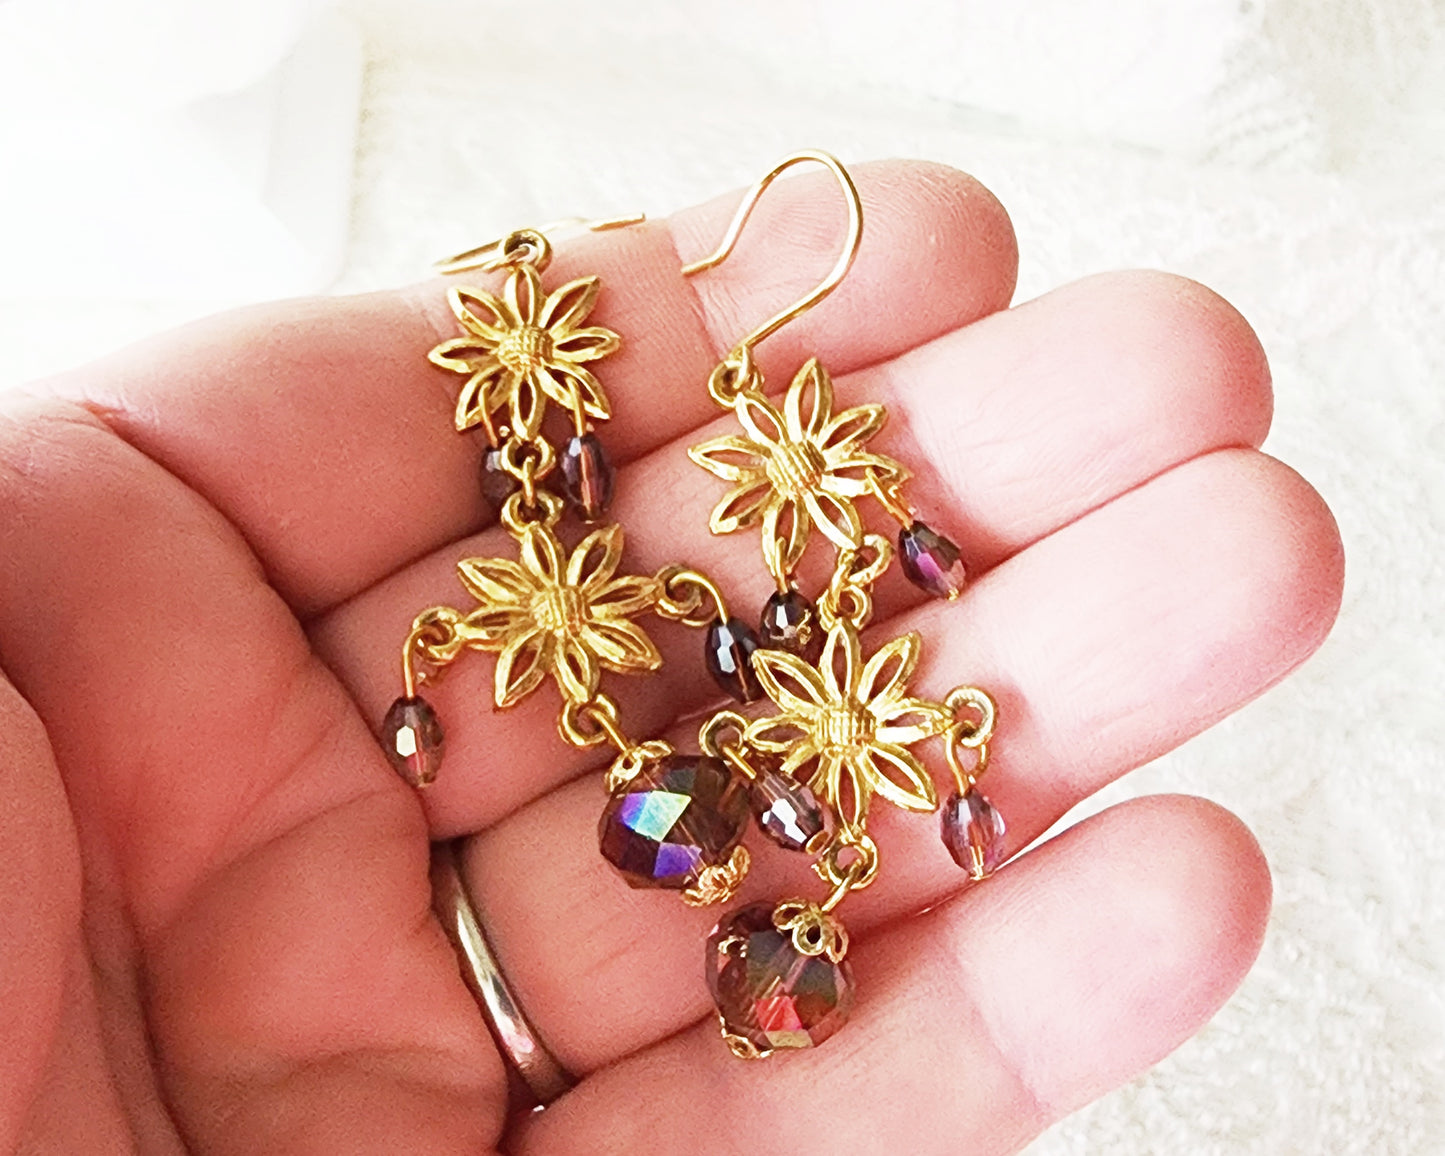 Long Gold Floral Crystal Chandelier Earrings, Long gold flowers with mauve AB crystal dangles on white 